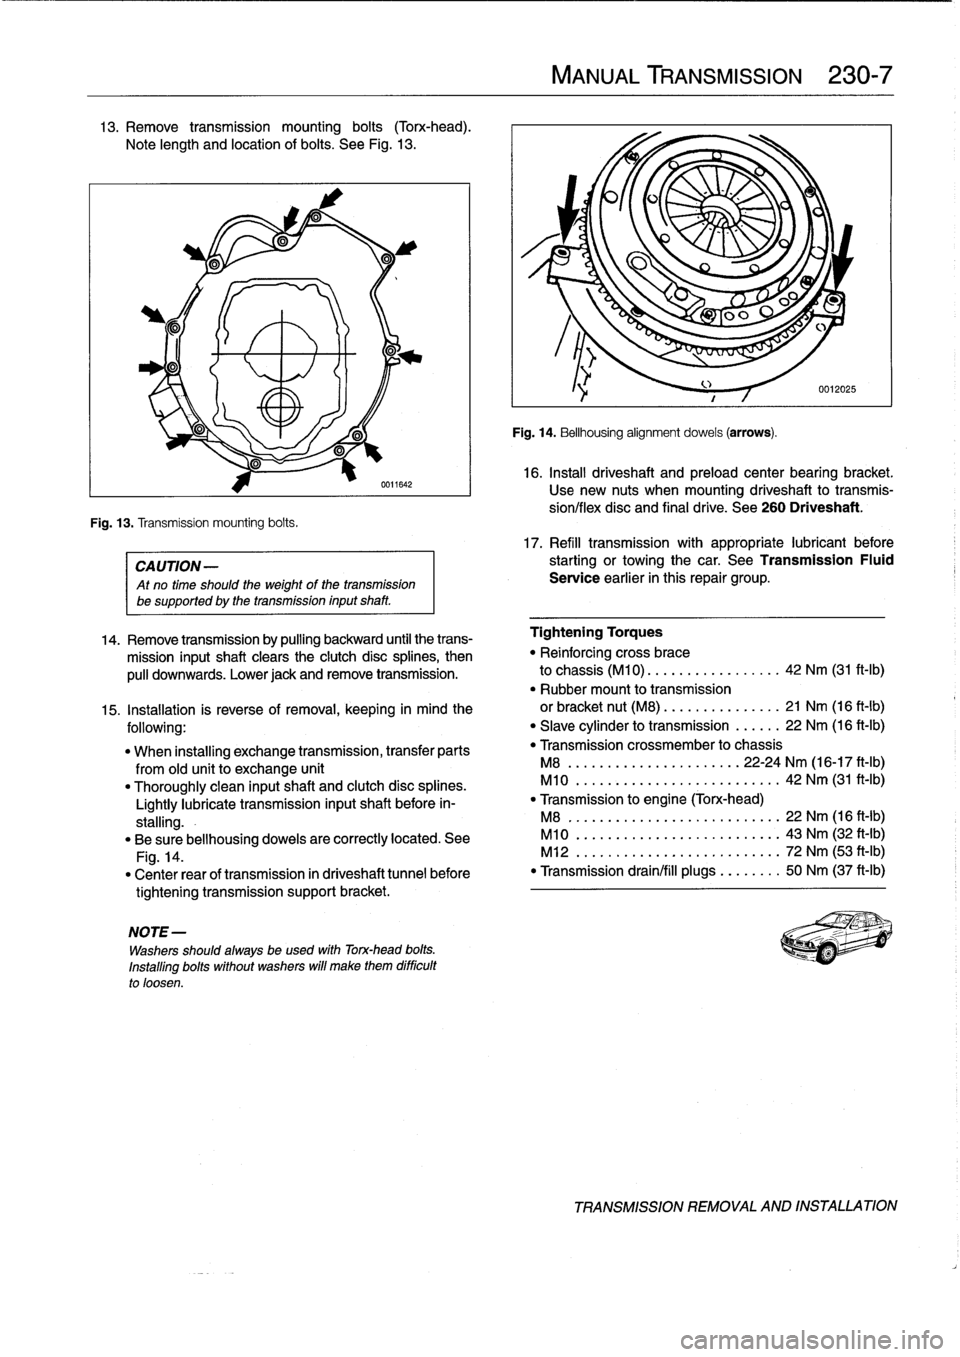 BMW 325i 1992 E36 Workshop Manual 13
.
Remove
transmission
mounting
bolts
(Torx-head)
.

Note
length
and
location
of
bolts
.
See
Fig
.
13
.

Fig
.
13
.
Transmission
mounting
bolts
.

0611642

CA
UTION-

Atno
time
should
the
weight
of
